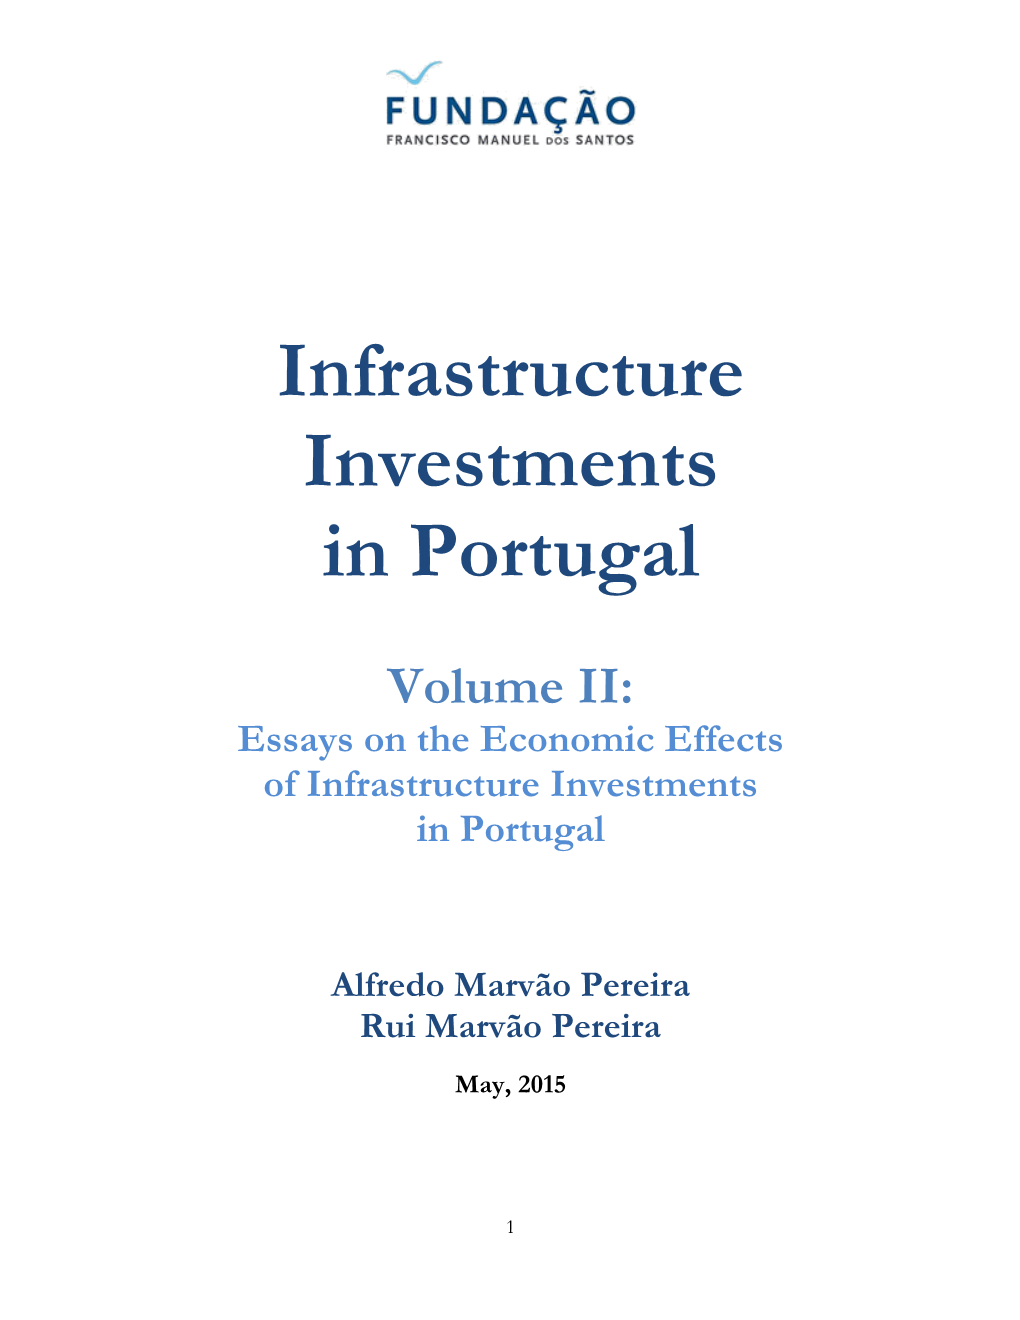 Infrastructure Investments in Portugal